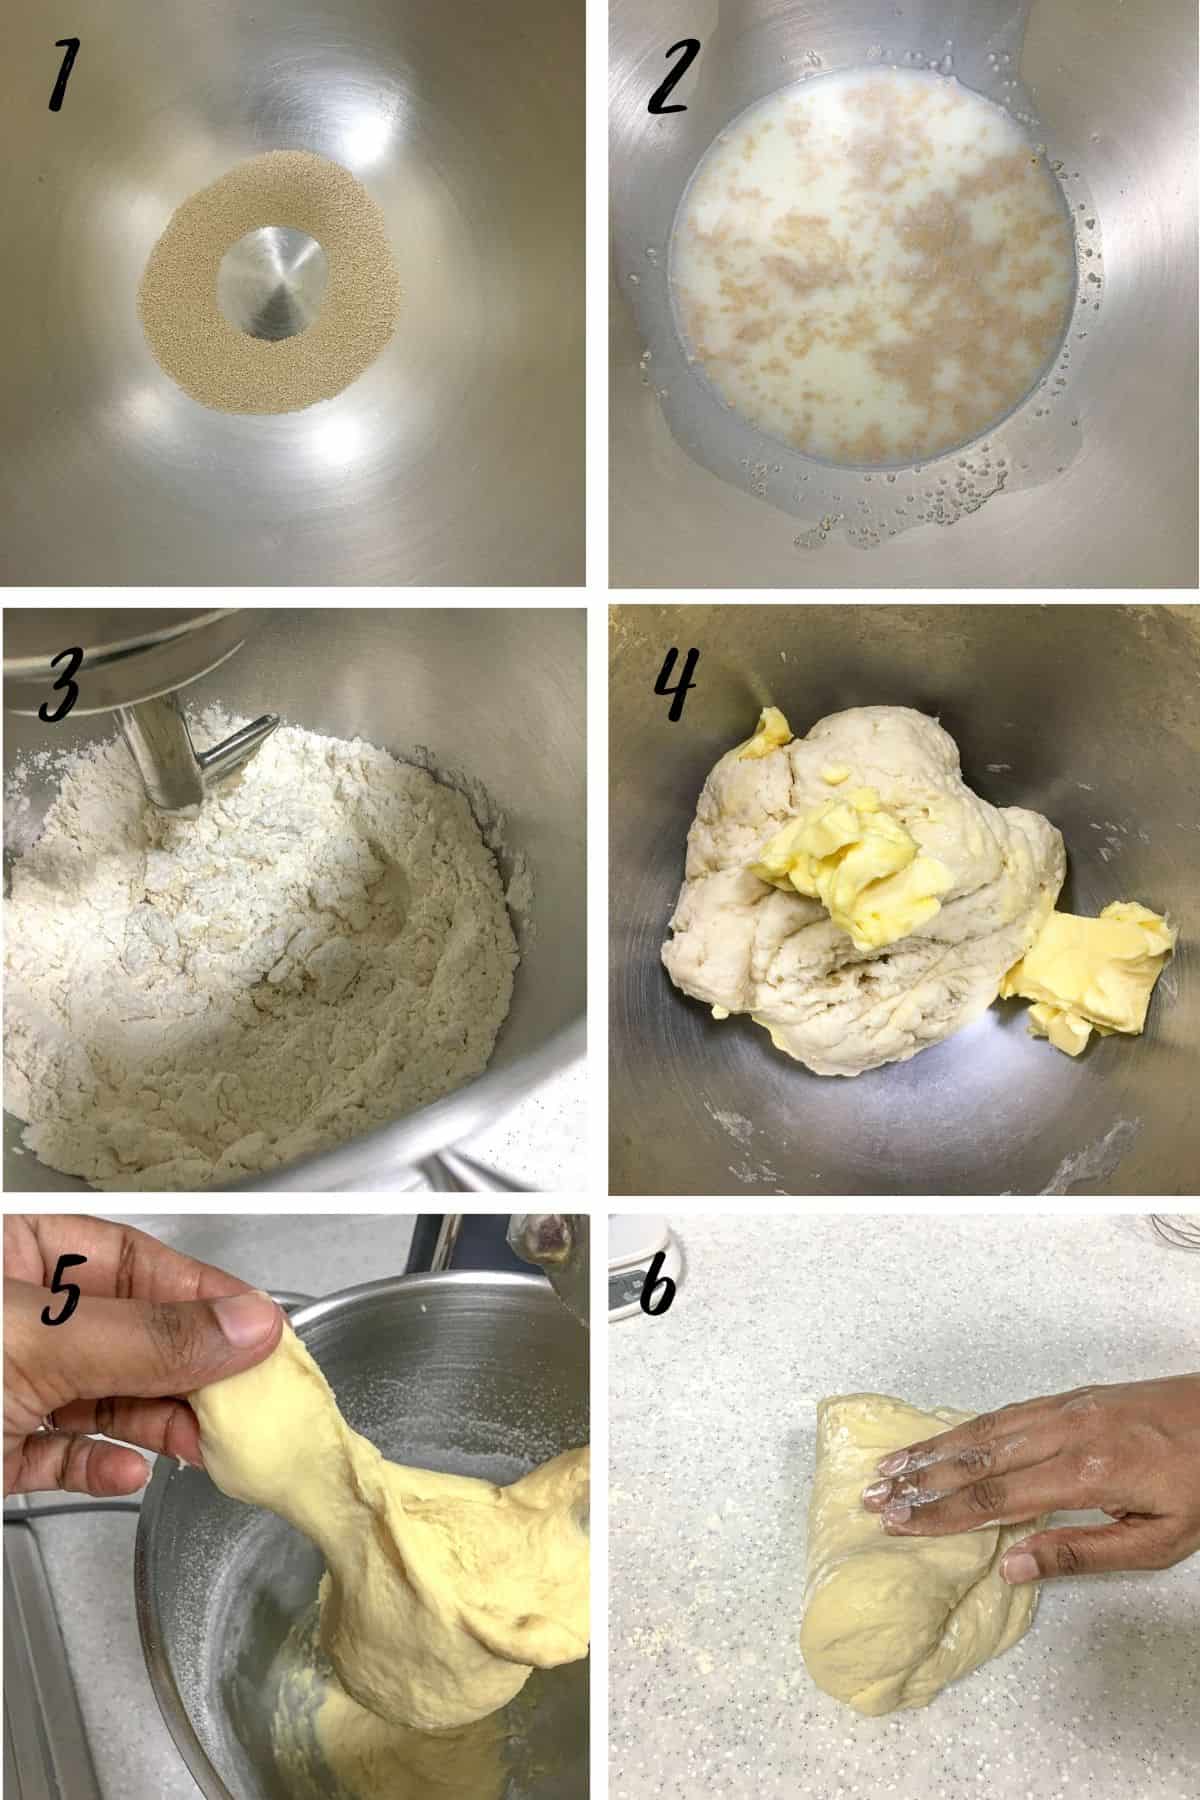 A poster of 6 images showing how to mix the dough for easy yeast rolls